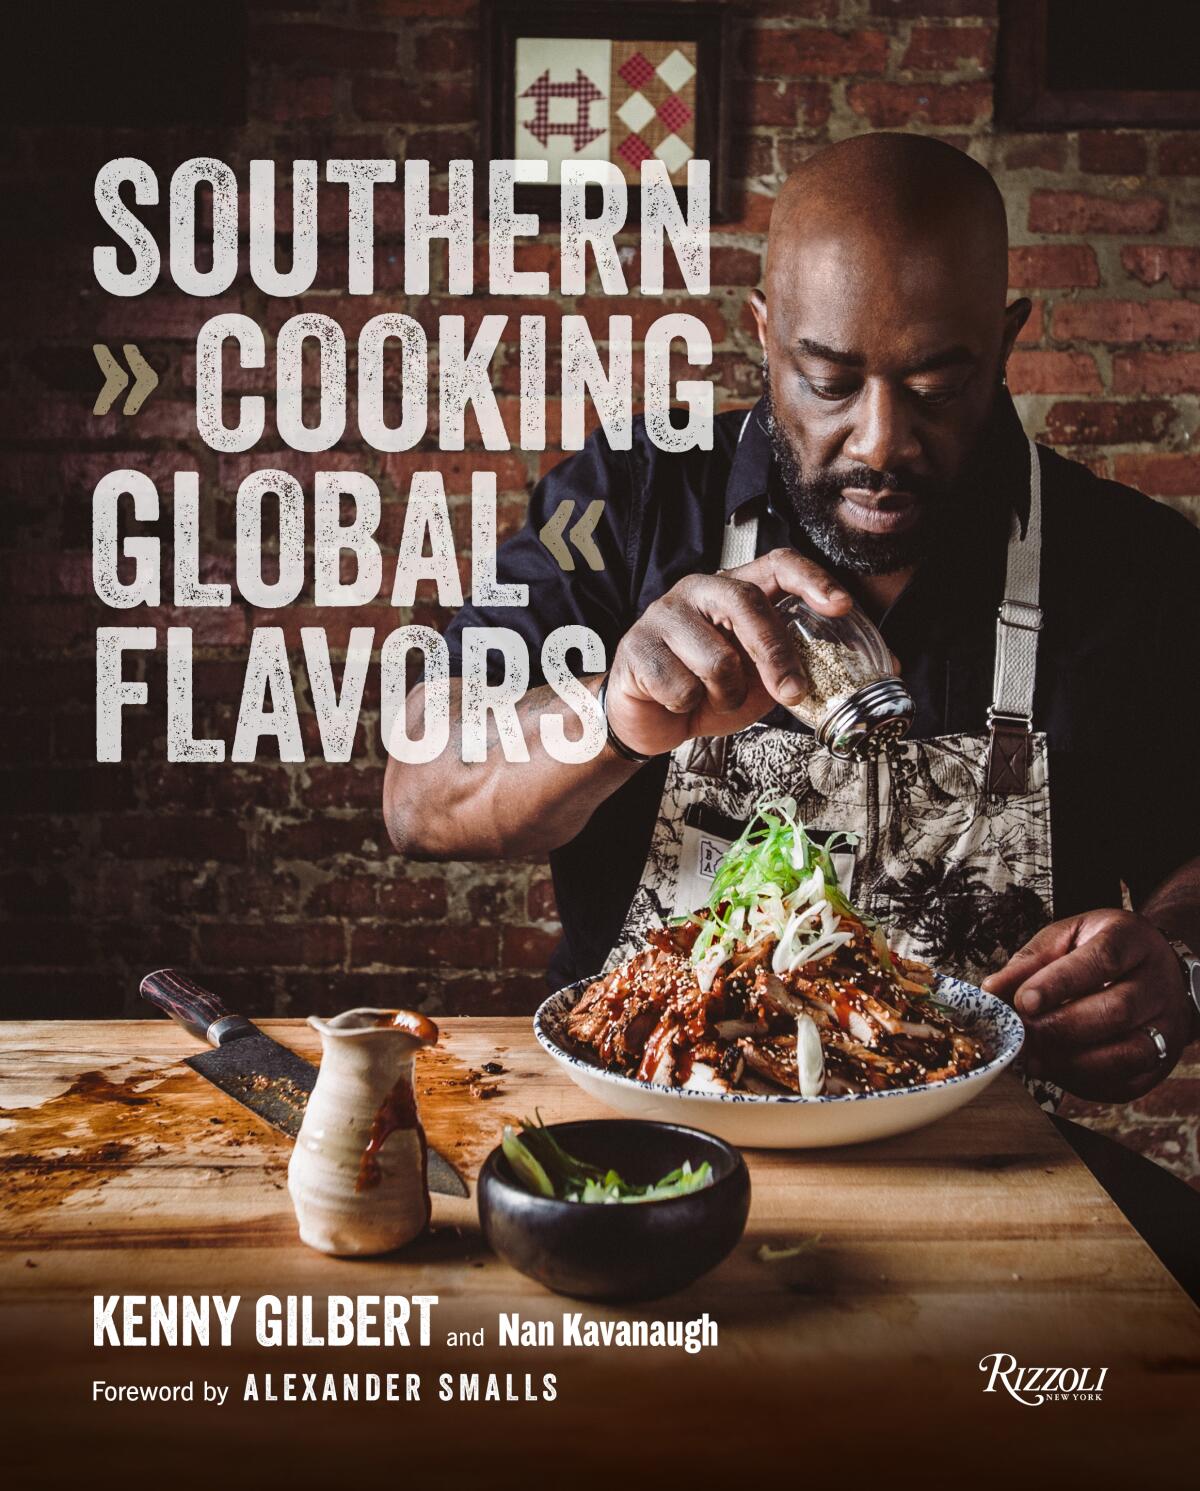 The cover for Southern Cooking, Global Flavors by Kenny Gilbert